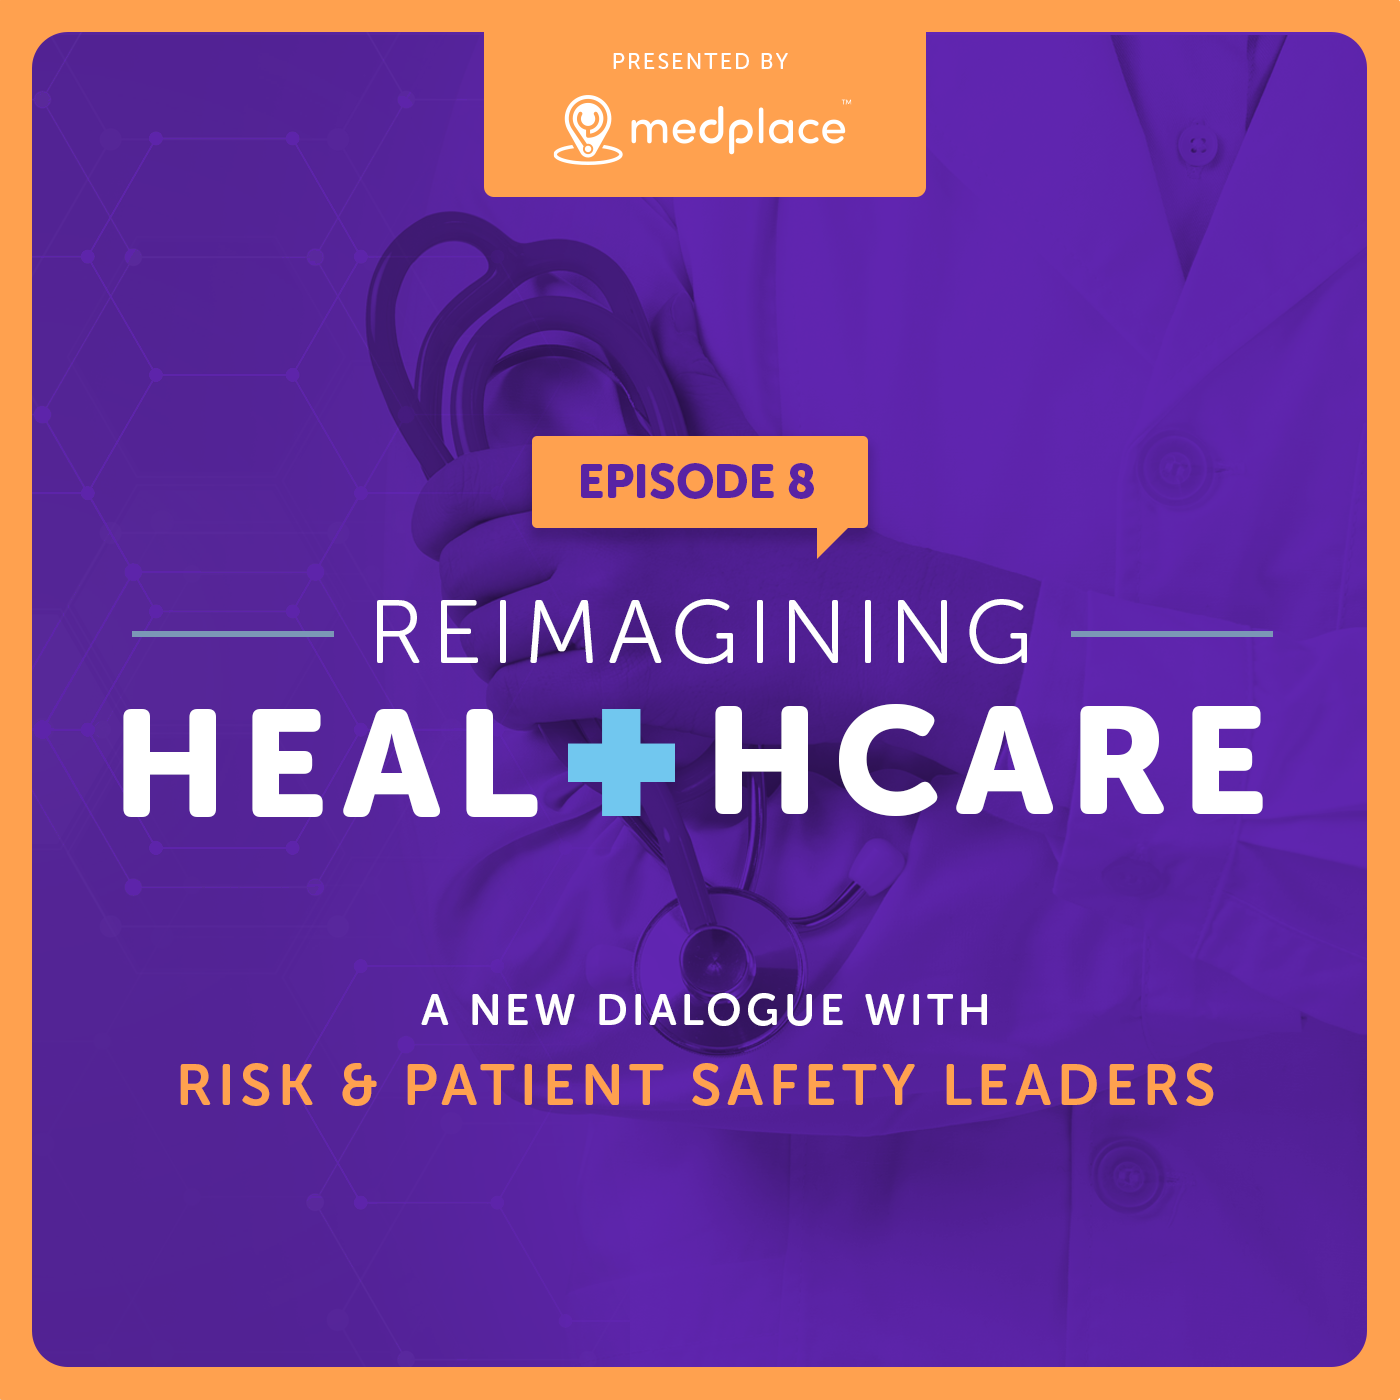 Episode 8 - Reimagining Healthcare - A New Dialogue with Risk and Patient Safety Leaders